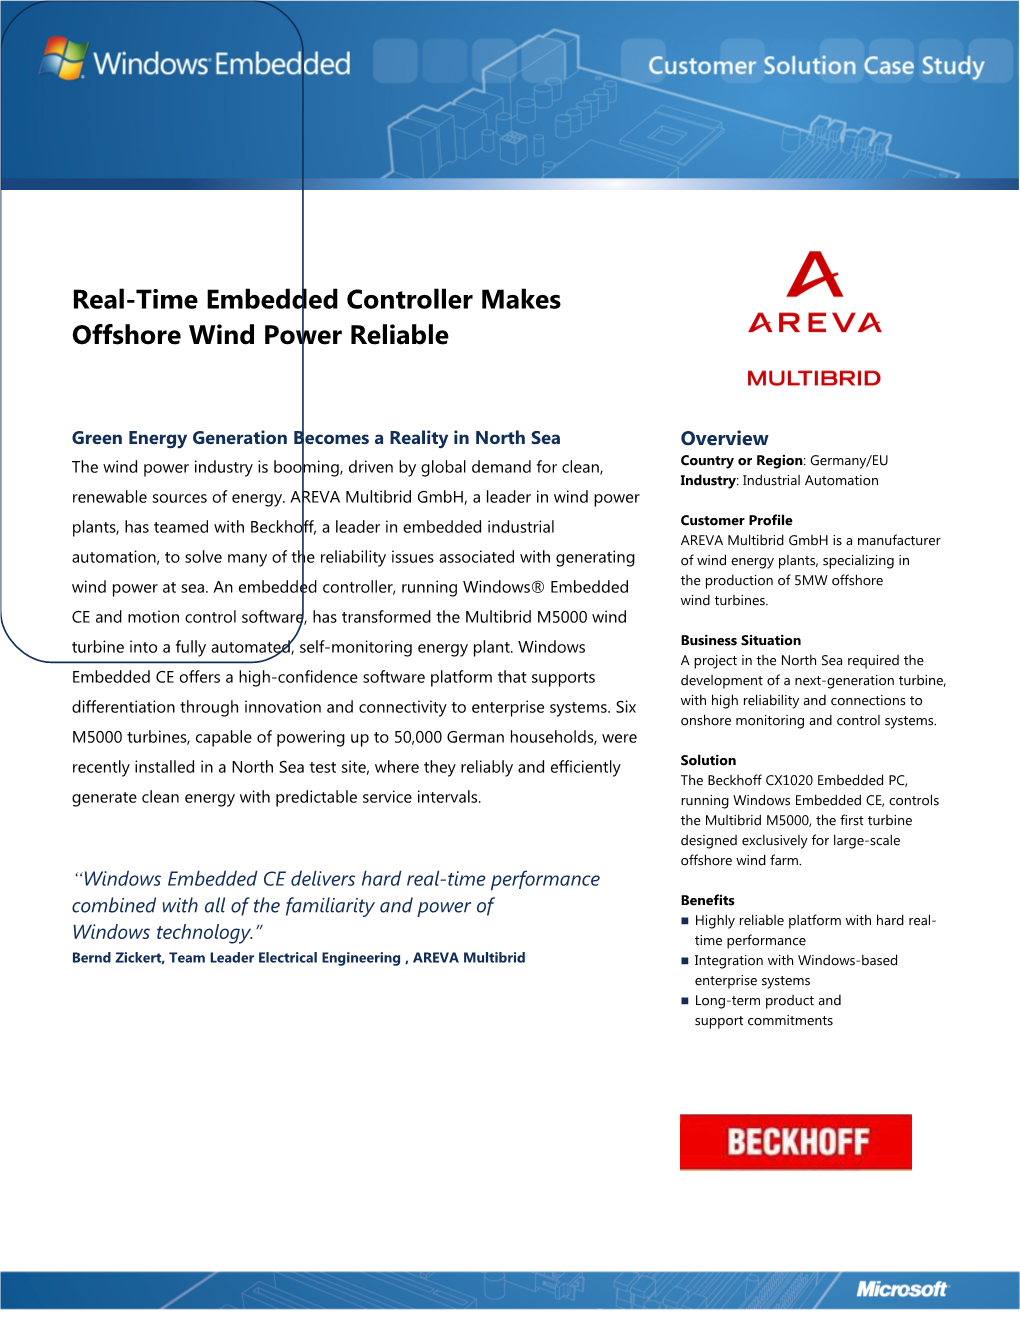 Metia Windows Embedded Real-Time Embedded Controller Makes Offshore Wind Power Reliable